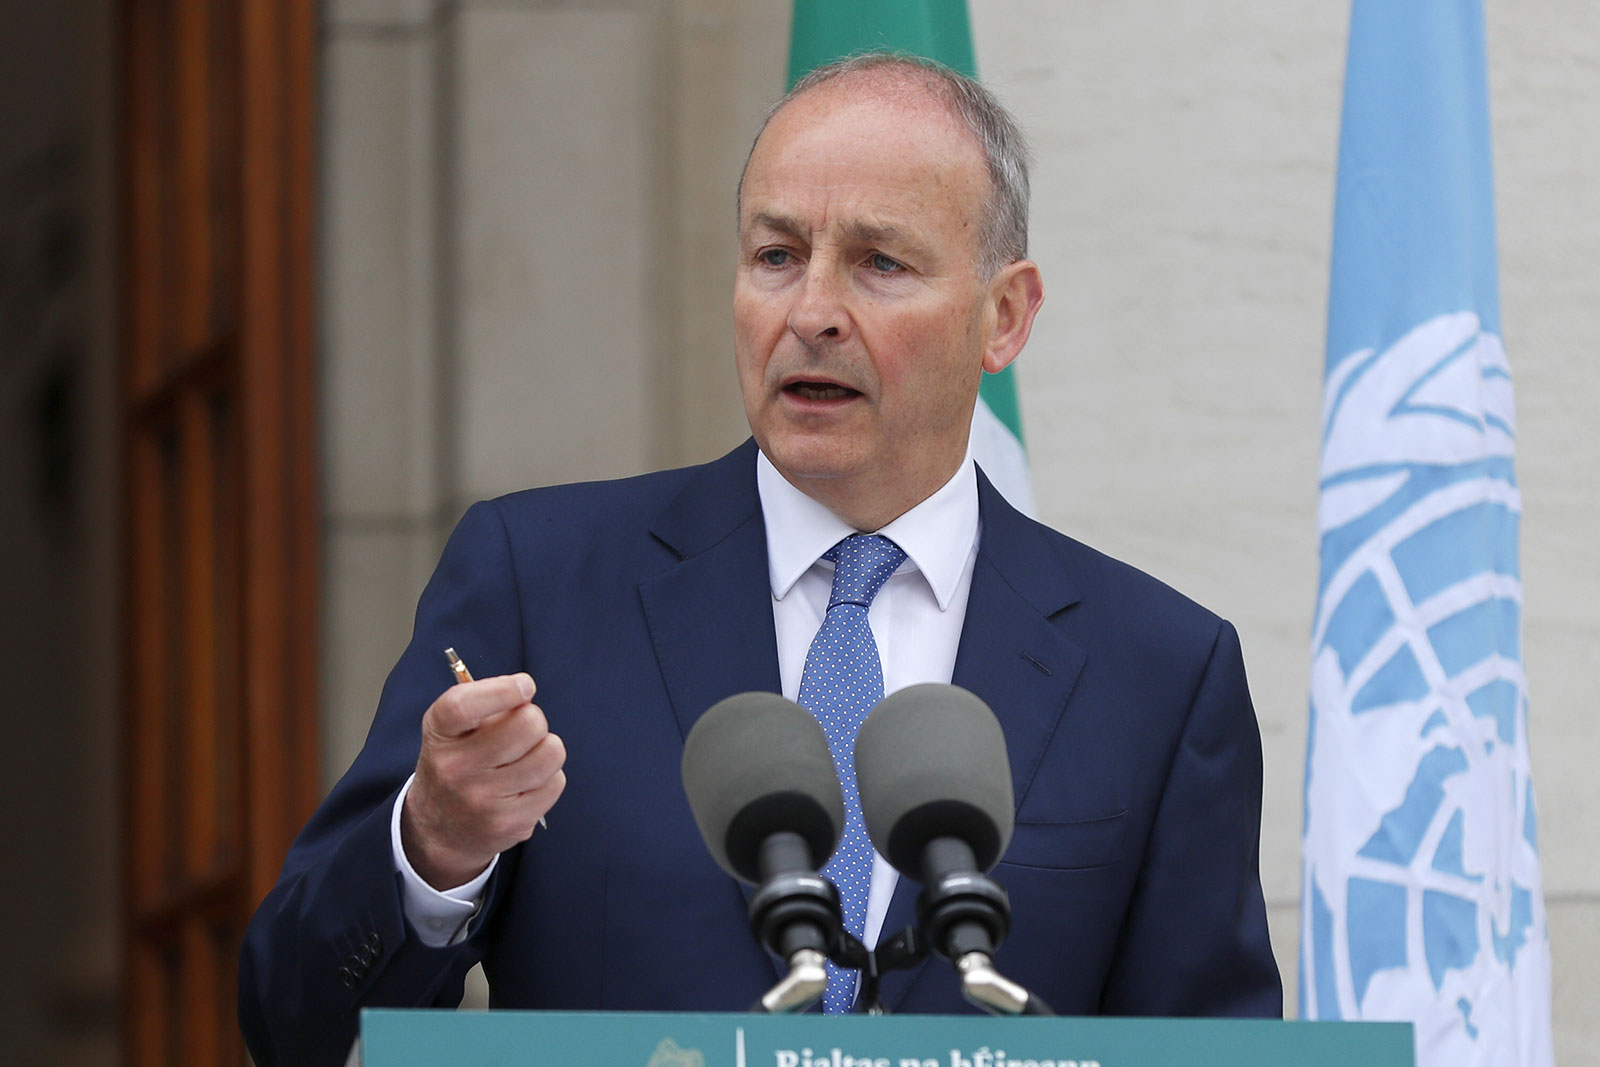 Ireland's Foreign Minister Micheál Martin speaks during a press conference outside the Government Building in Dublin, Ireland, on Wednesday May 22.